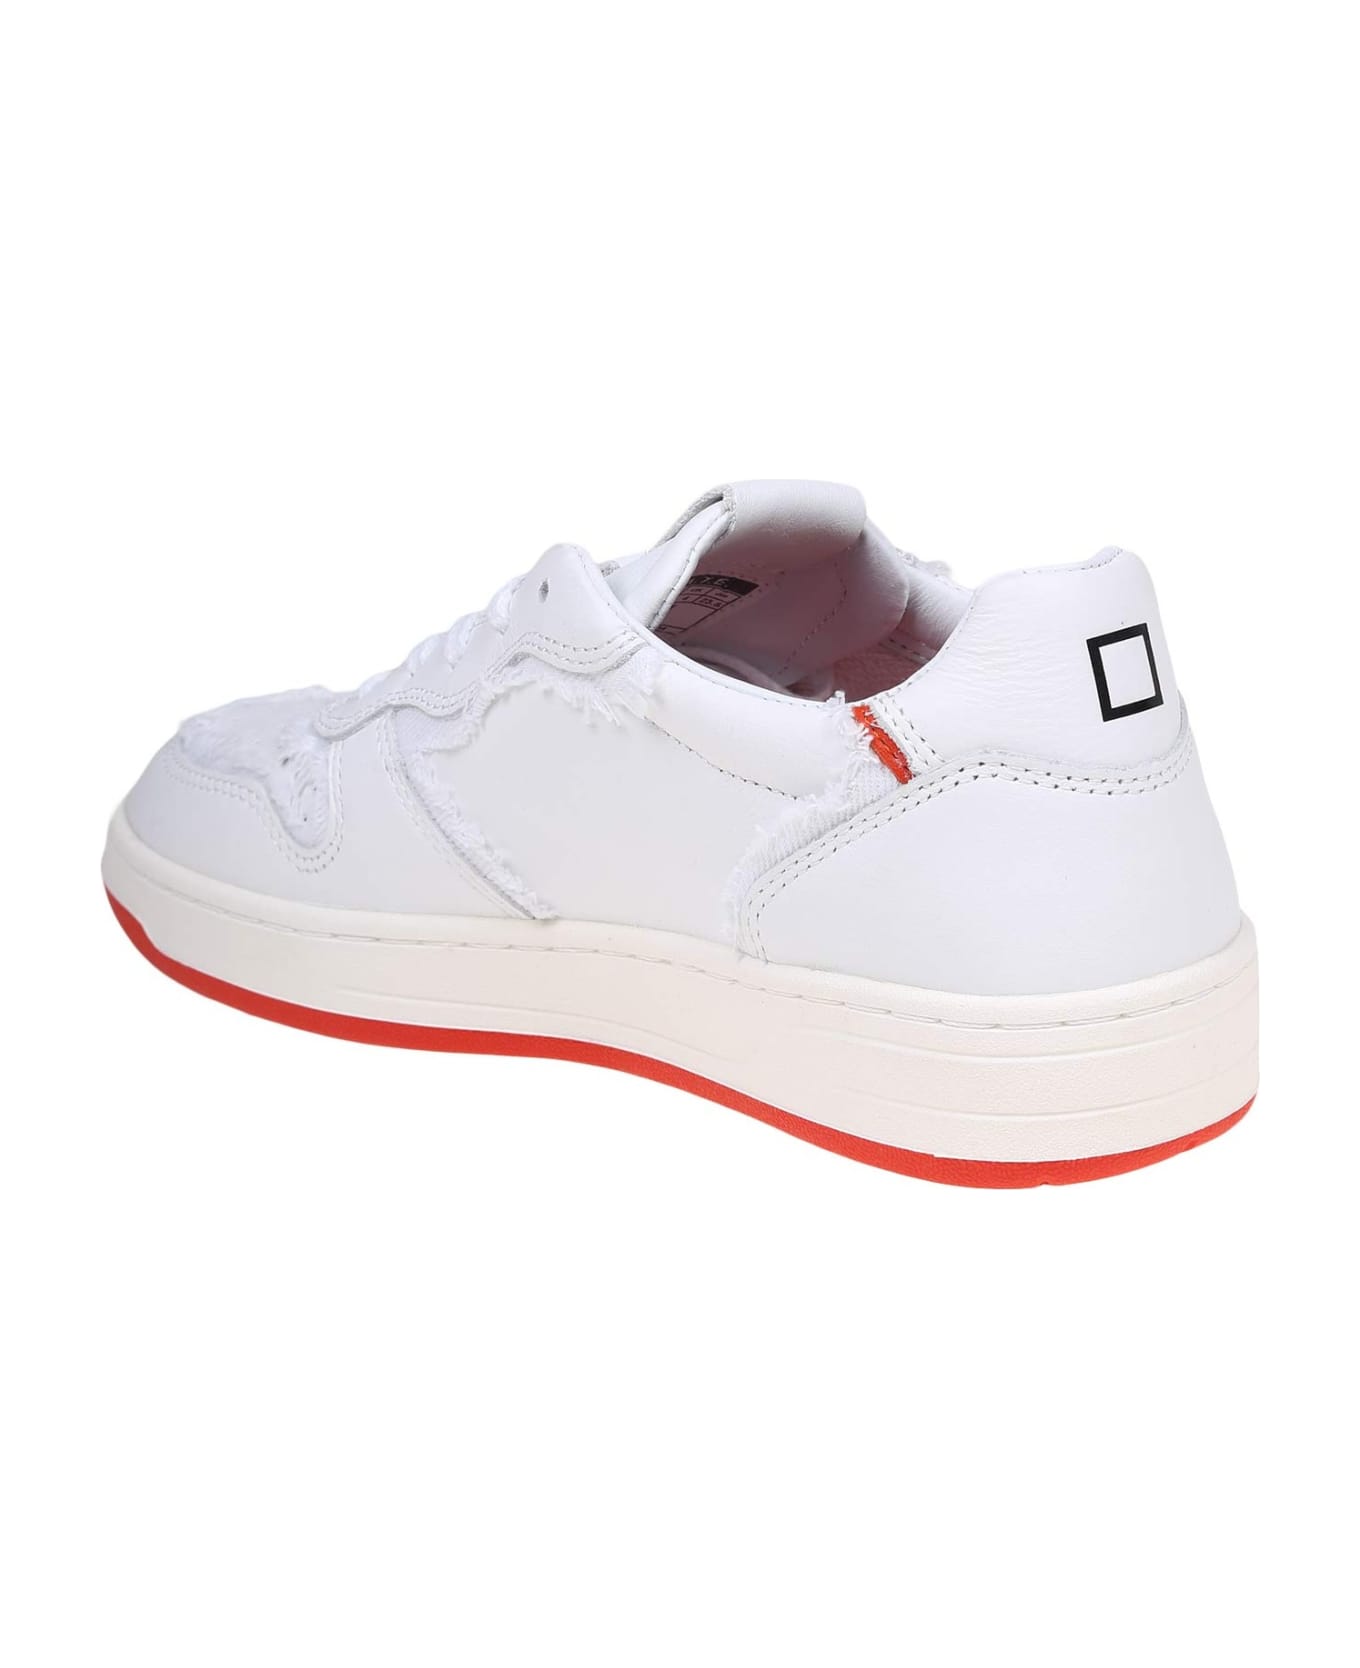 D.A.T.E. Court Sneakers In White Leather - CHERRY